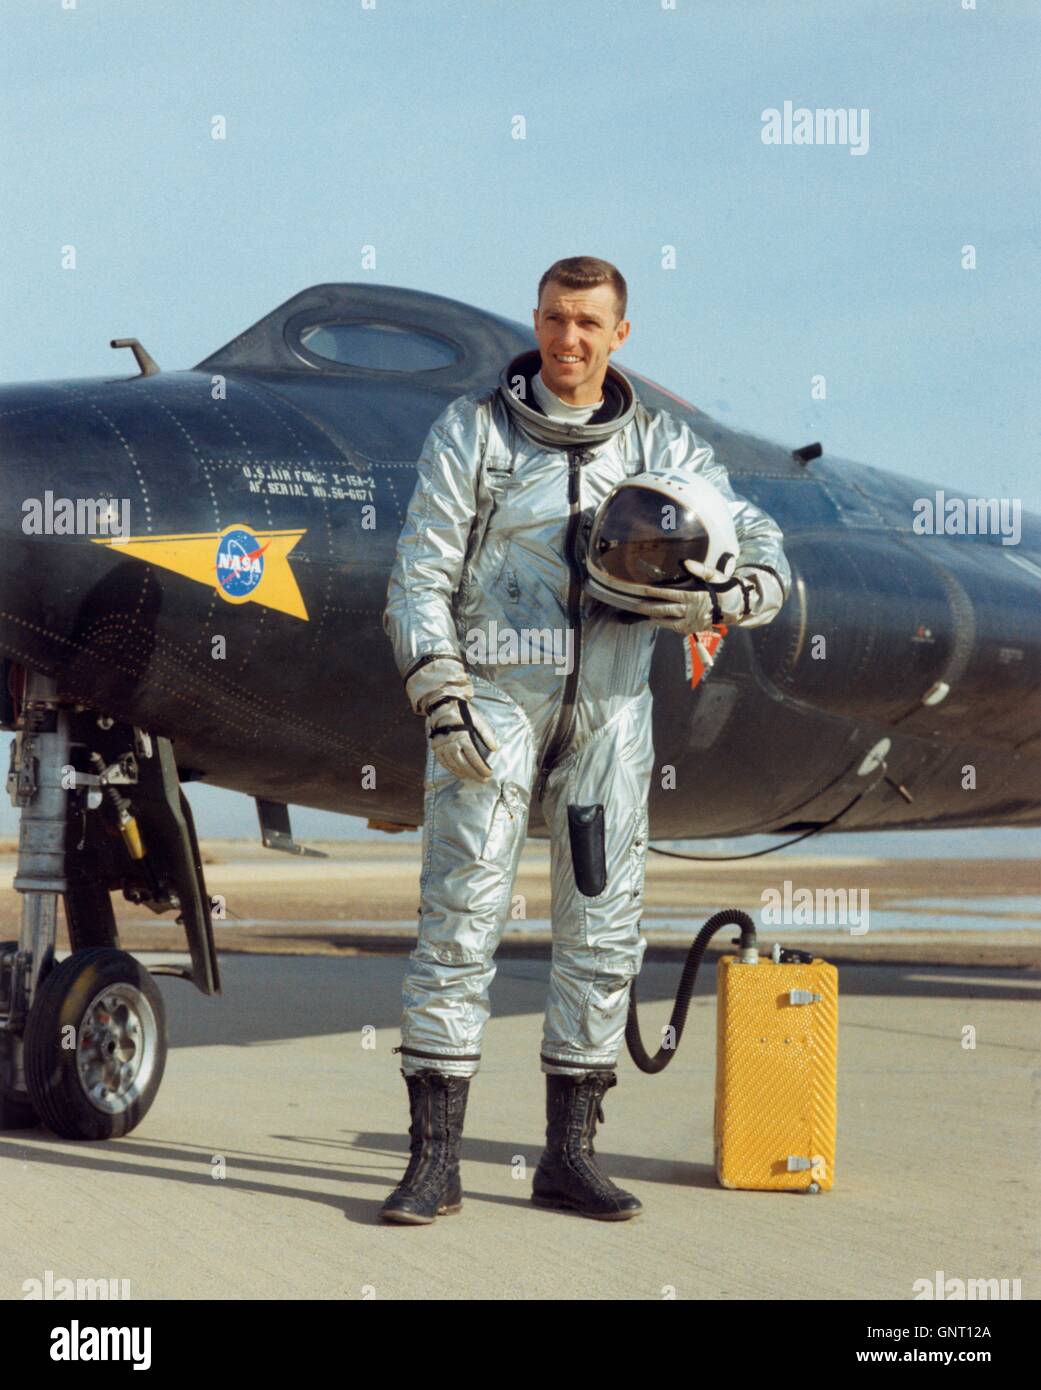 U.S Air Forces test pilot Joe Engle poses next to the experimental X-15A-2 aircraft June 29, 1965 at Edwards Air Force Base, California. Engle flew the X-15 to an altitude of 280,600 feet becoming the youngest pilot ever to qualify as an astronaut. Stock Photo